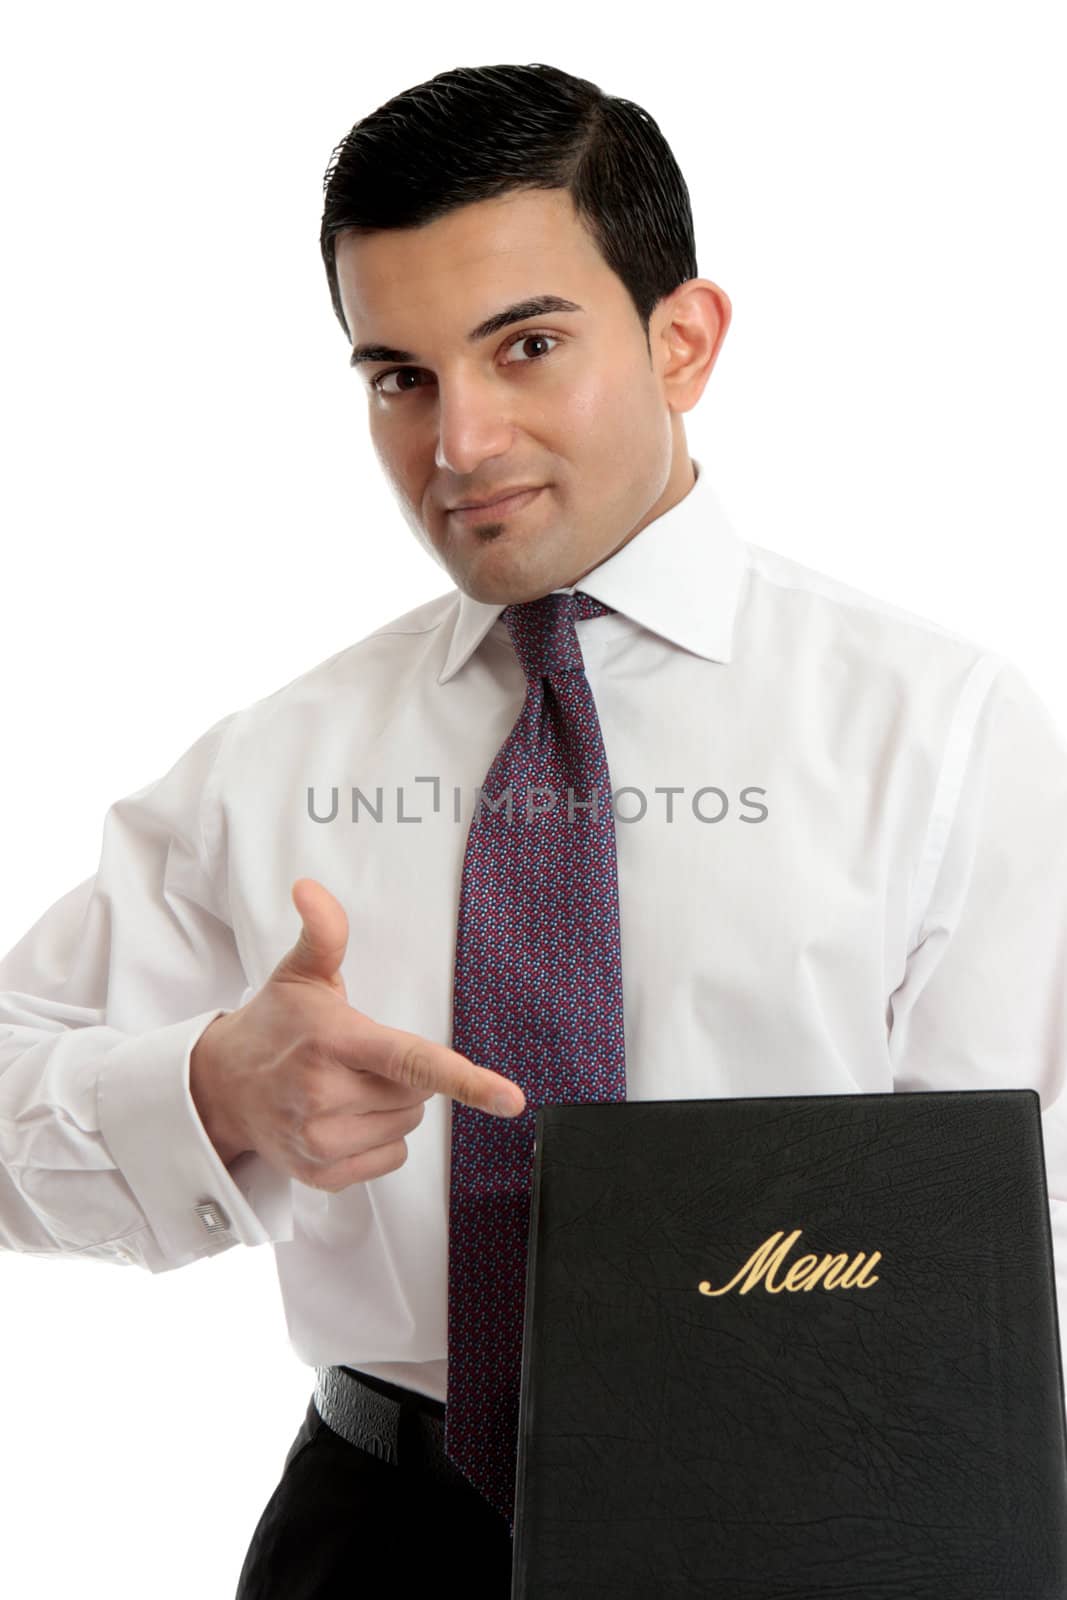 A smartly dressed waiter or restaurnt owner pointing to a menu. 
Could also be a presentation, brochure or other business item.